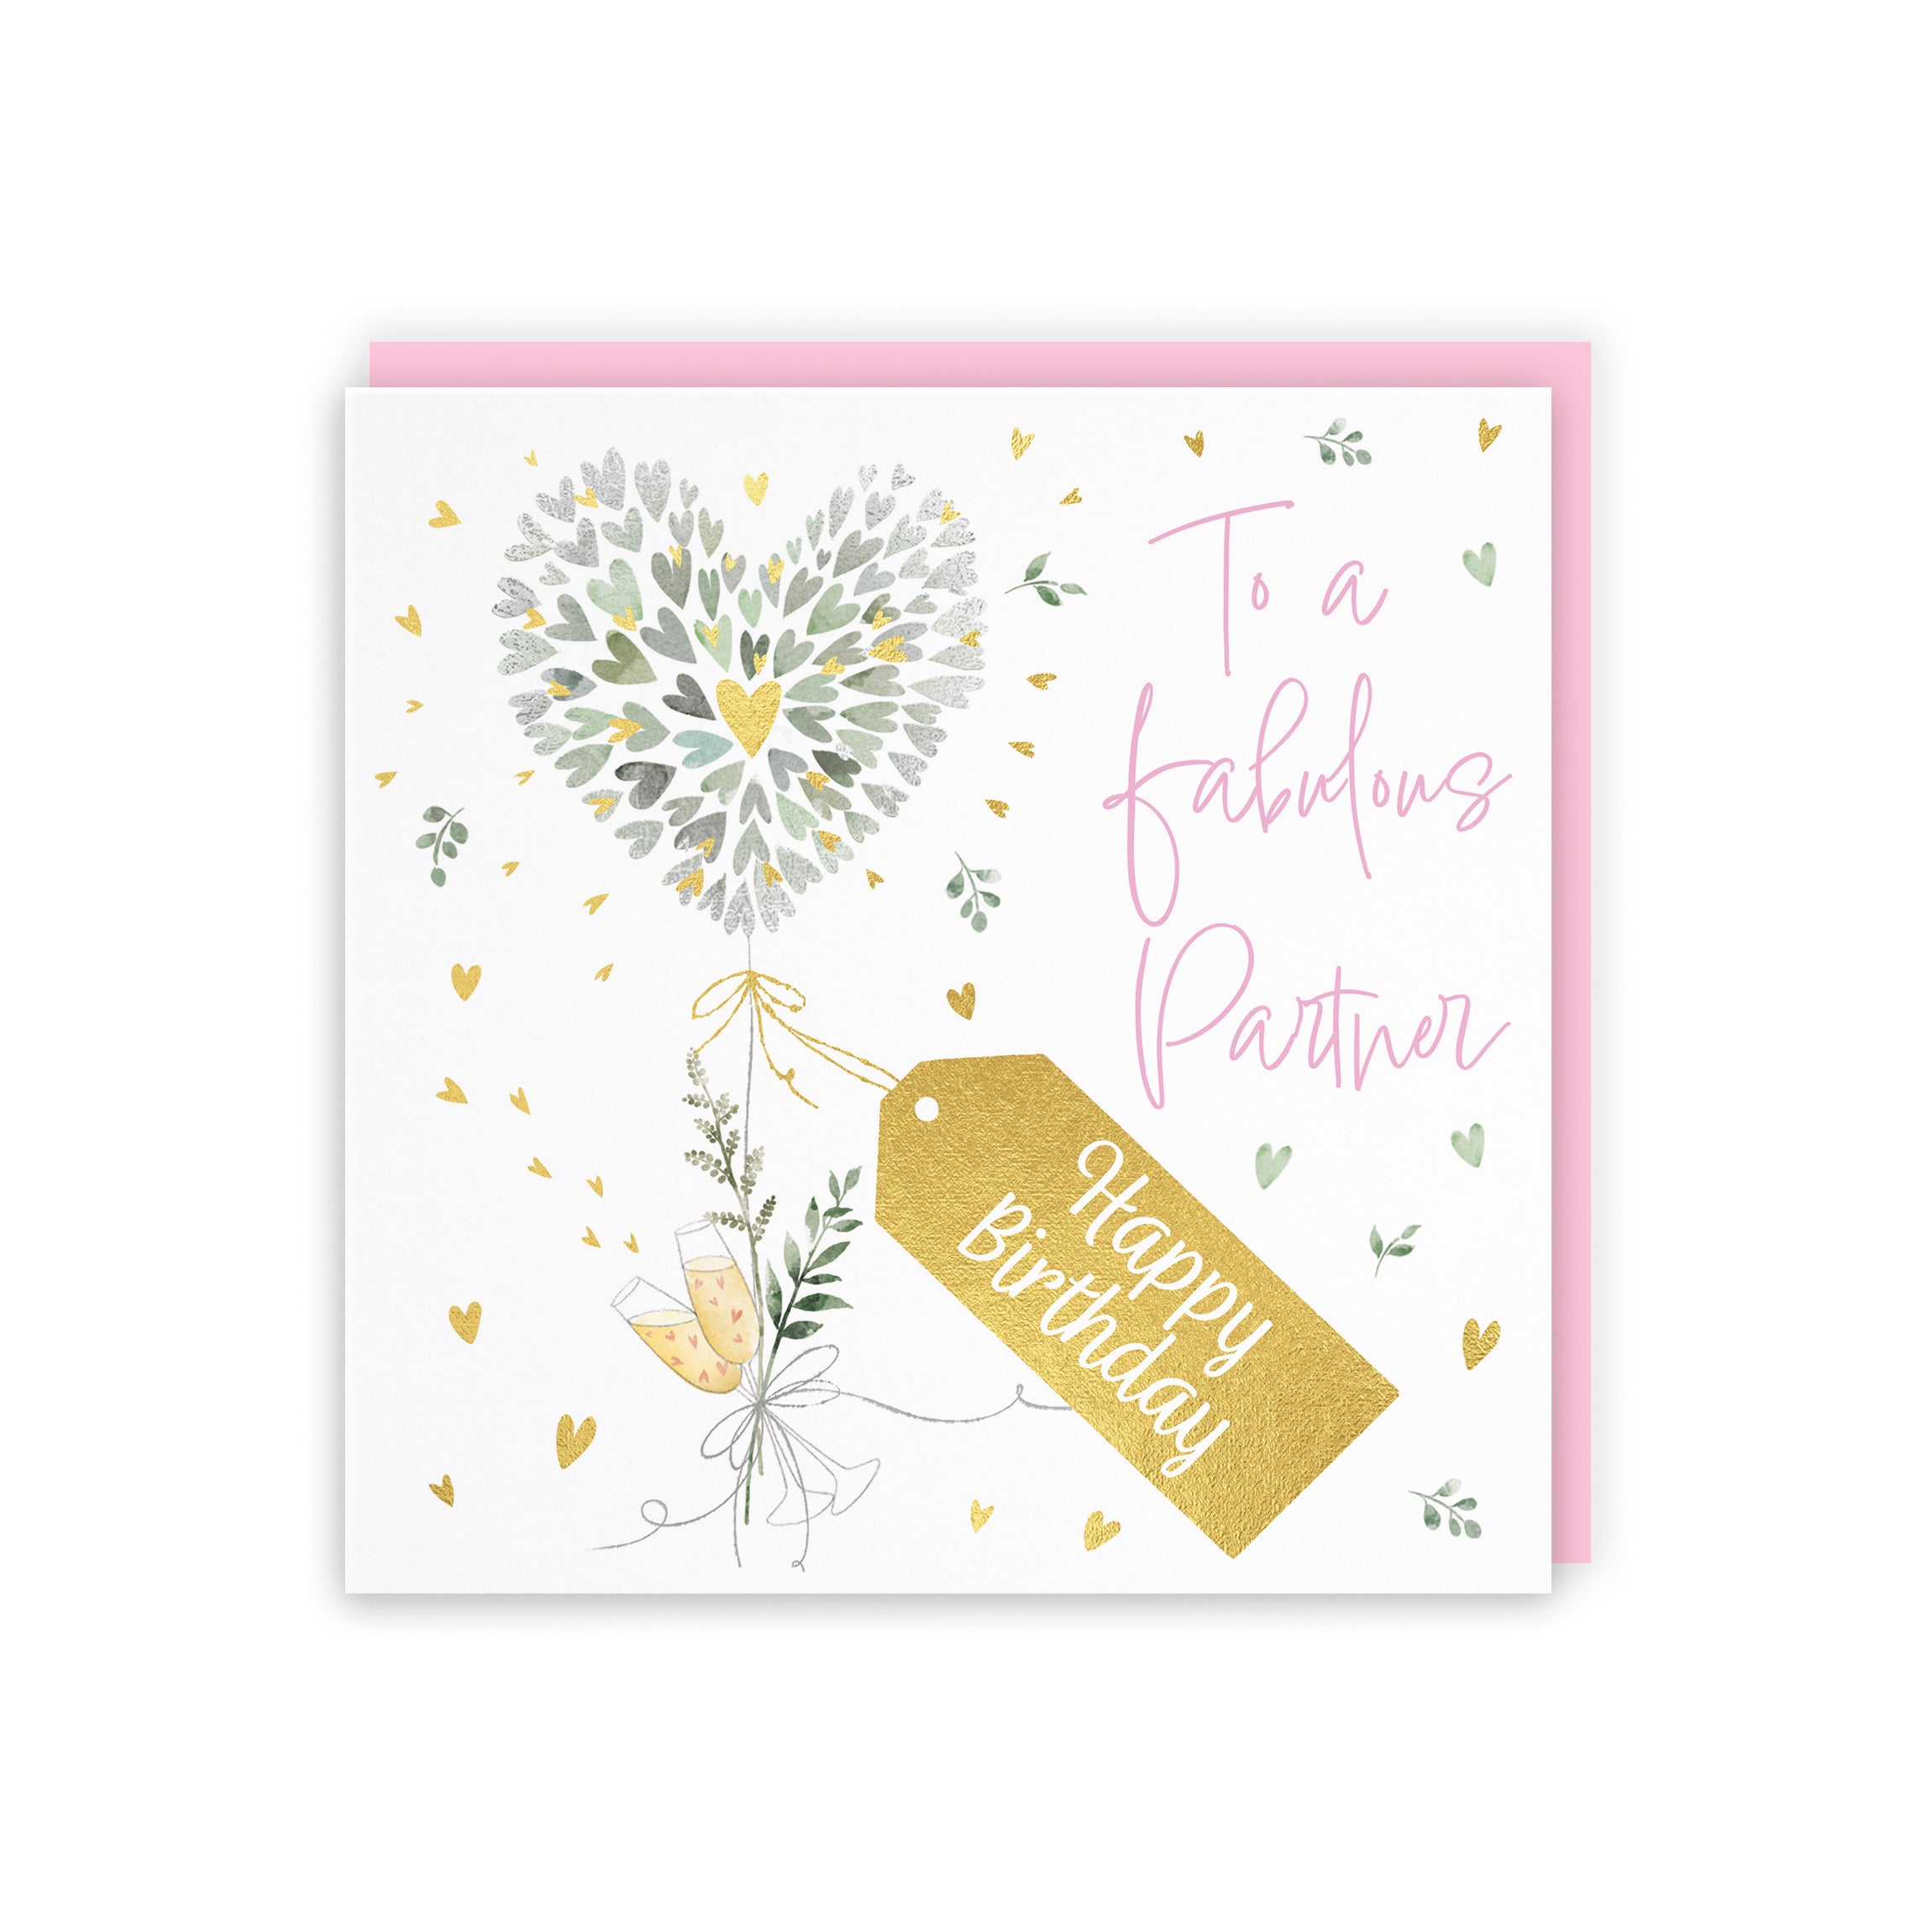 Partner Contemporary Hearts Birthday Card Gold Foil Milo's Gallery - Default Title (B0CY9WQYBZ)